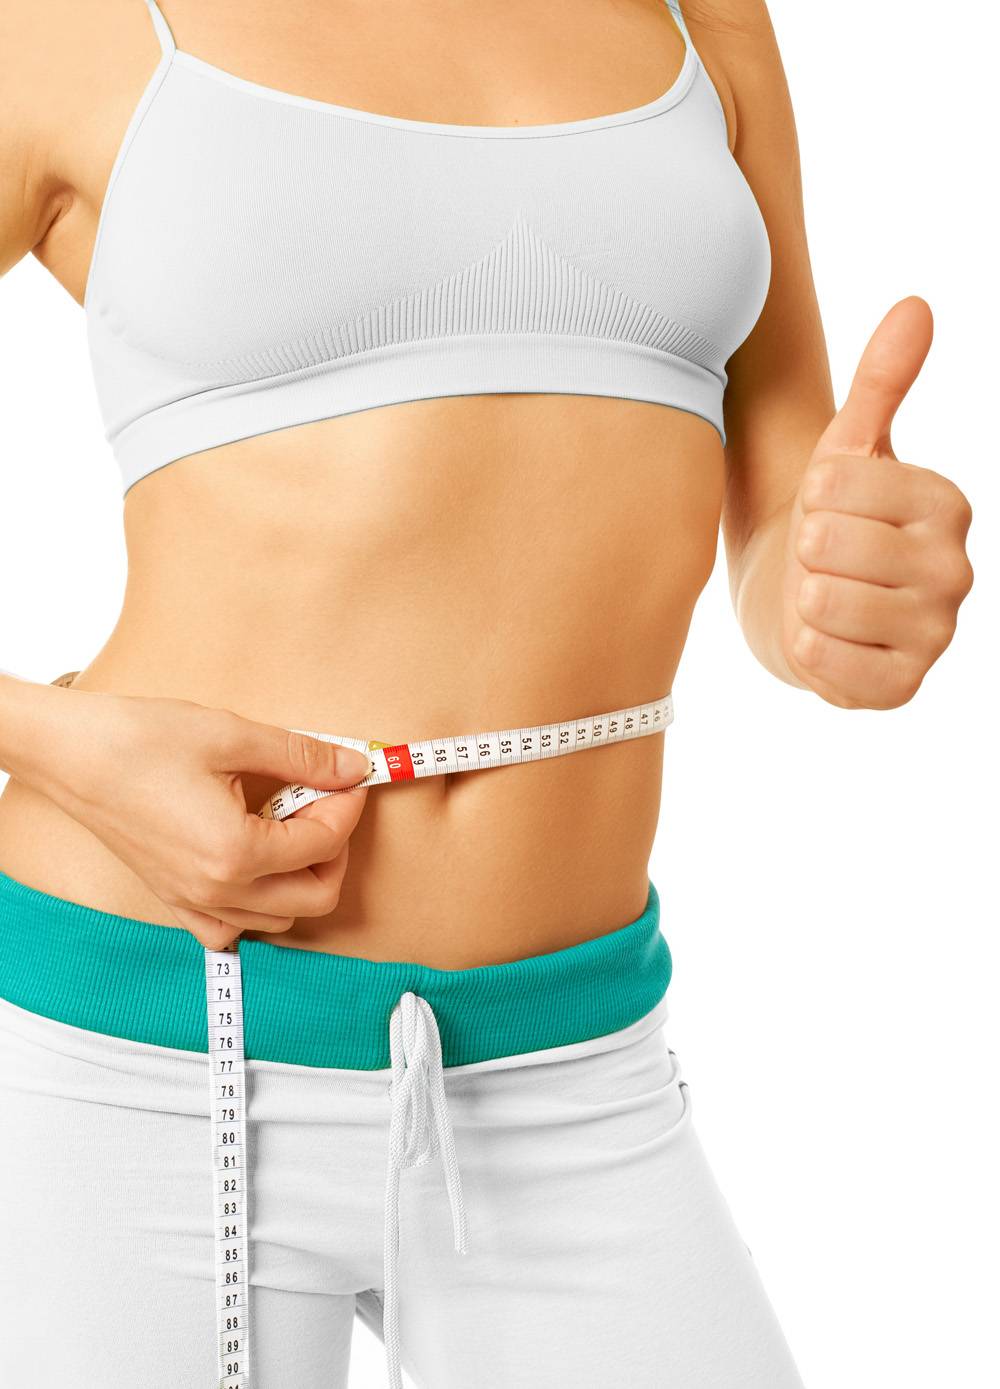 lose weight around your middle by seeing a weight loss naturopath